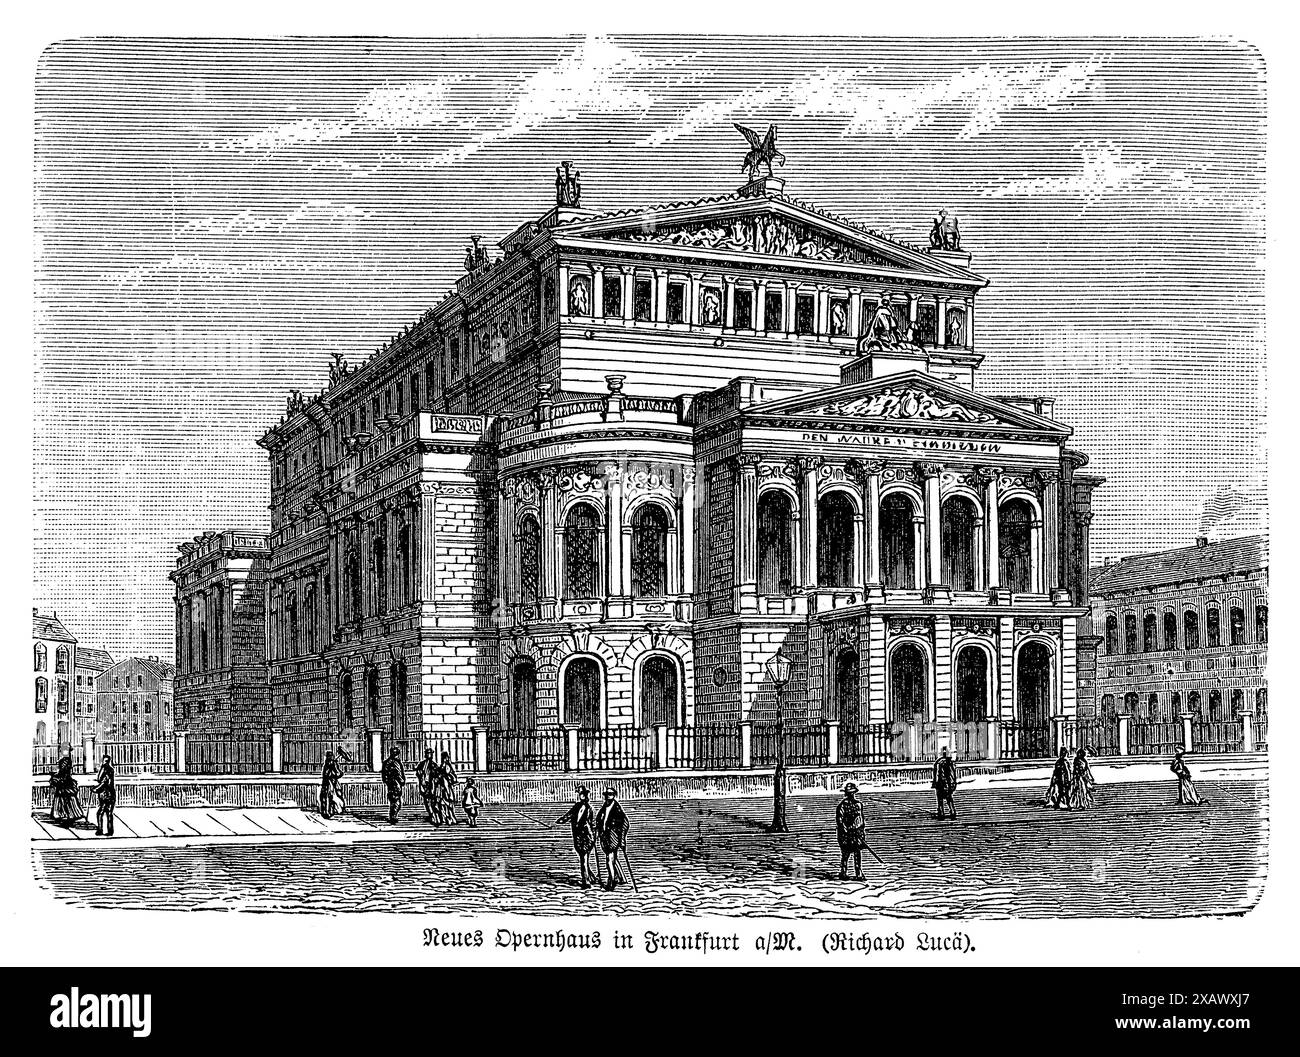 The 'Alte Oper (Old Opera) concert hall in Frankfurt am Main' engraving exquisitely captures the architectural brilliance of this renowned concert hall designed by Richard Lucae. The detailed depiction showcases the grand neoclassical facade, adorned with intricate sculptures, majestic columns, and ornate decorative elements. The engraving highlights the elegant symmetry and grandeur of the building, reflecting its significance as a cultural and architectural landmark in Frankfurt. The perspective draws viewers into the timeless beauty and historical importance of the Alte Oper, celebrating it Stock Photo